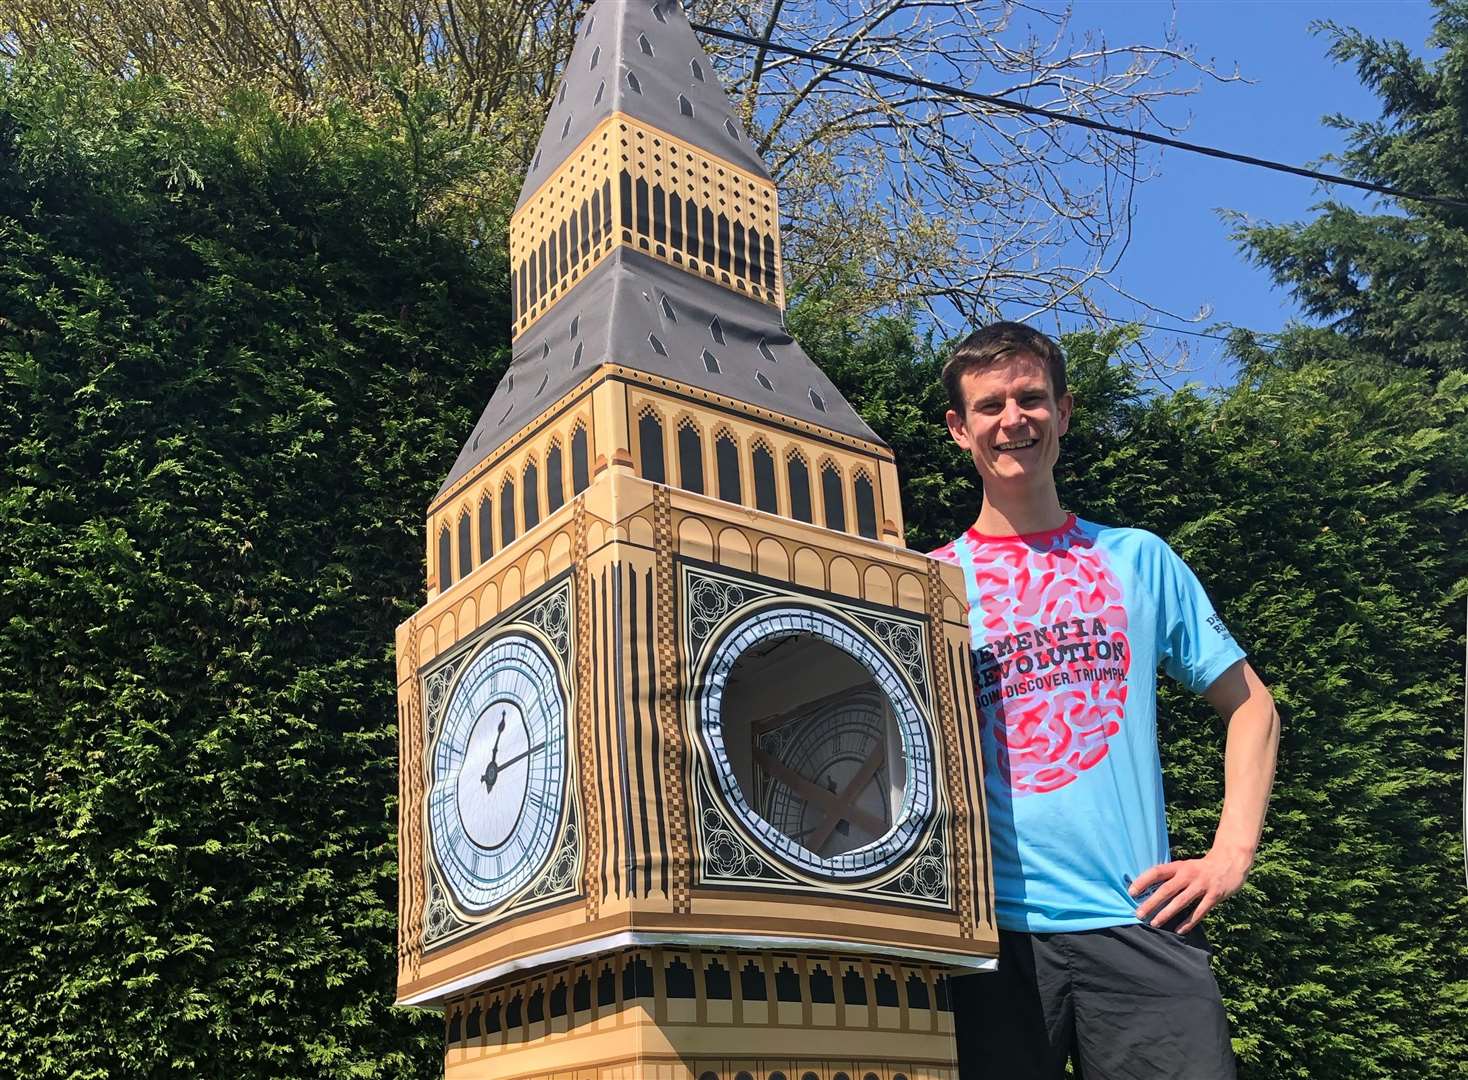 Lukas Bates, from Maidstone, with his Big Ben costume before the London Marathon. Picture: Alzheimer's Research UK